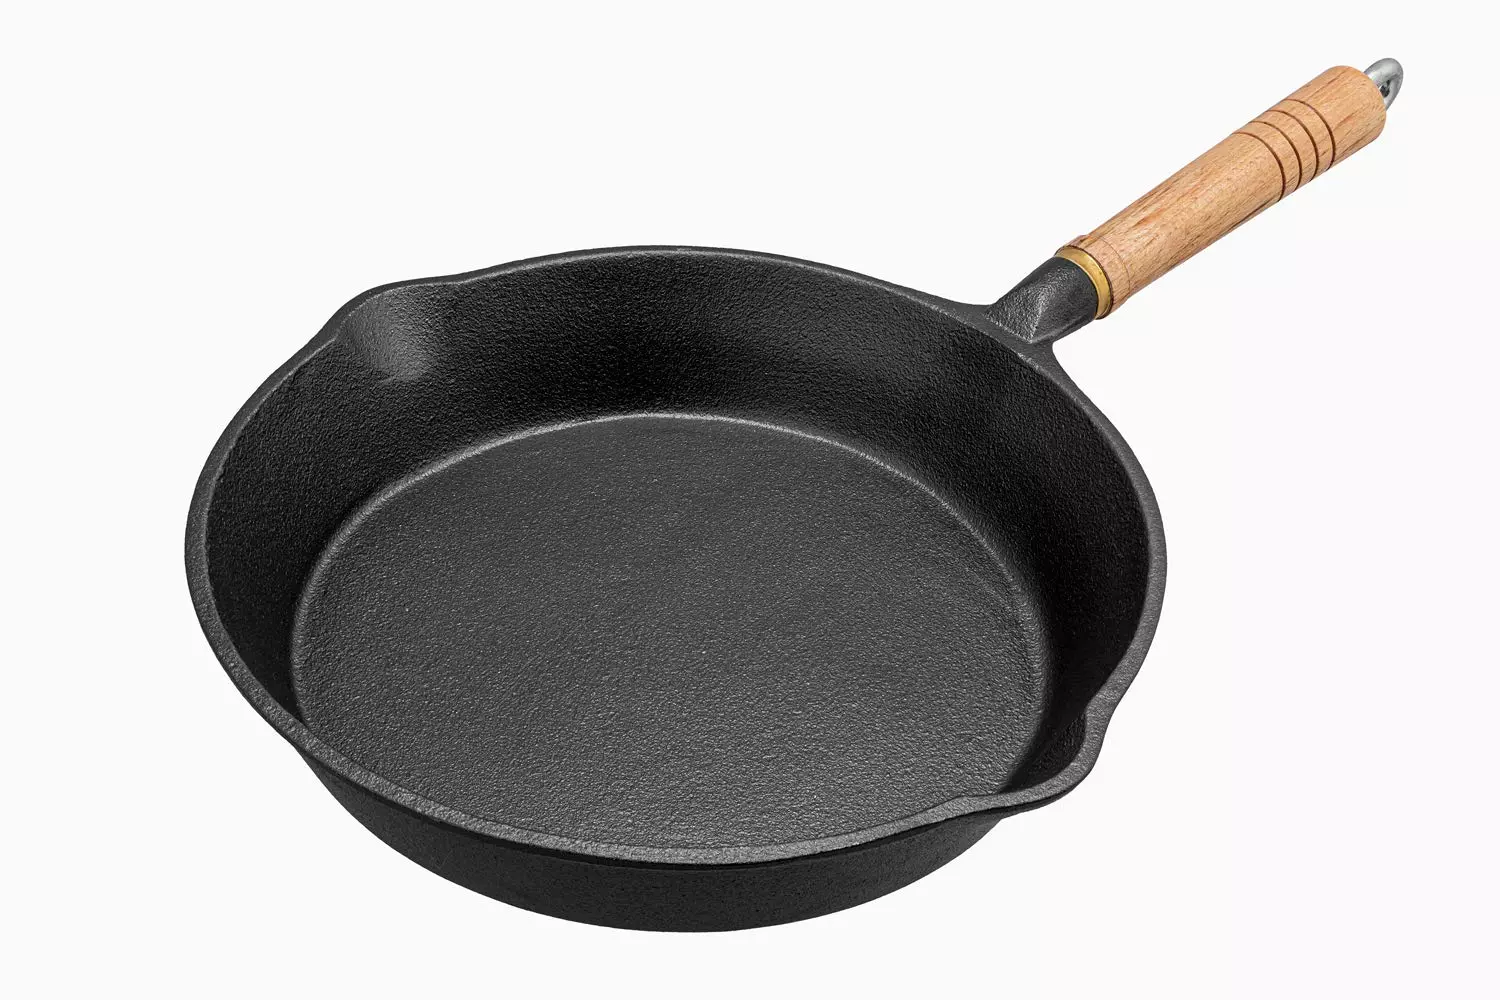 Healthy Choices Cast Iron Skillet Frying Pan 10.5 Inch, Black